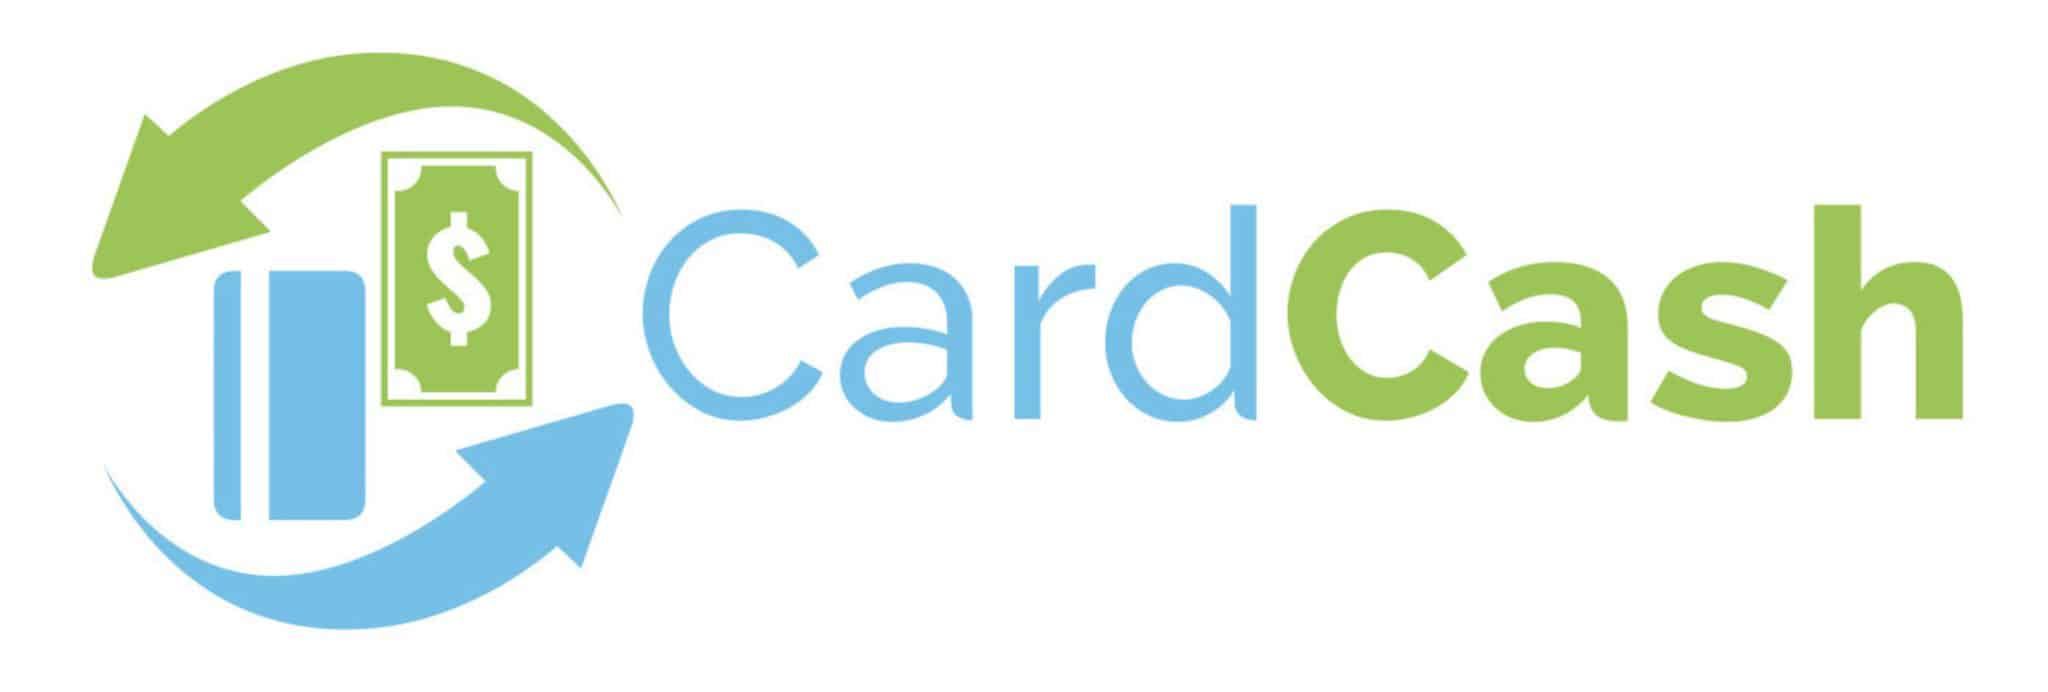 The logo for CardCash, a trusted platform for buying and selling discounted gift cards.